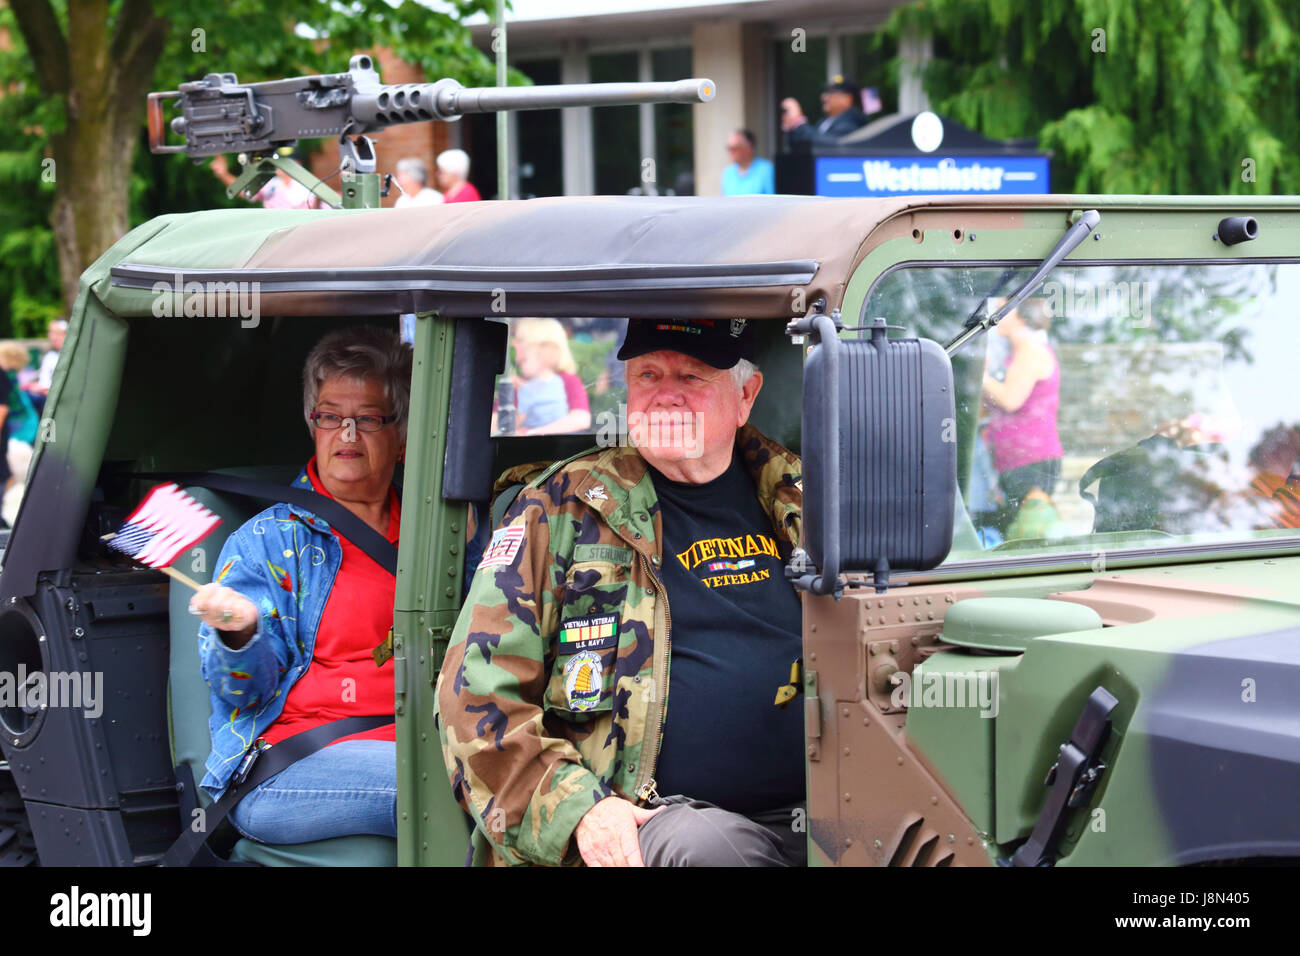 Westminster, Maryland, USA. 29th May, 2017. A US Navy Vietnam War veteran takes part in parades for Memorial Day, a federal holiday in the United States for remembering those who died while serving in the country's armed forces. Credit: James Brunker/Alamy Live News Stock Photo